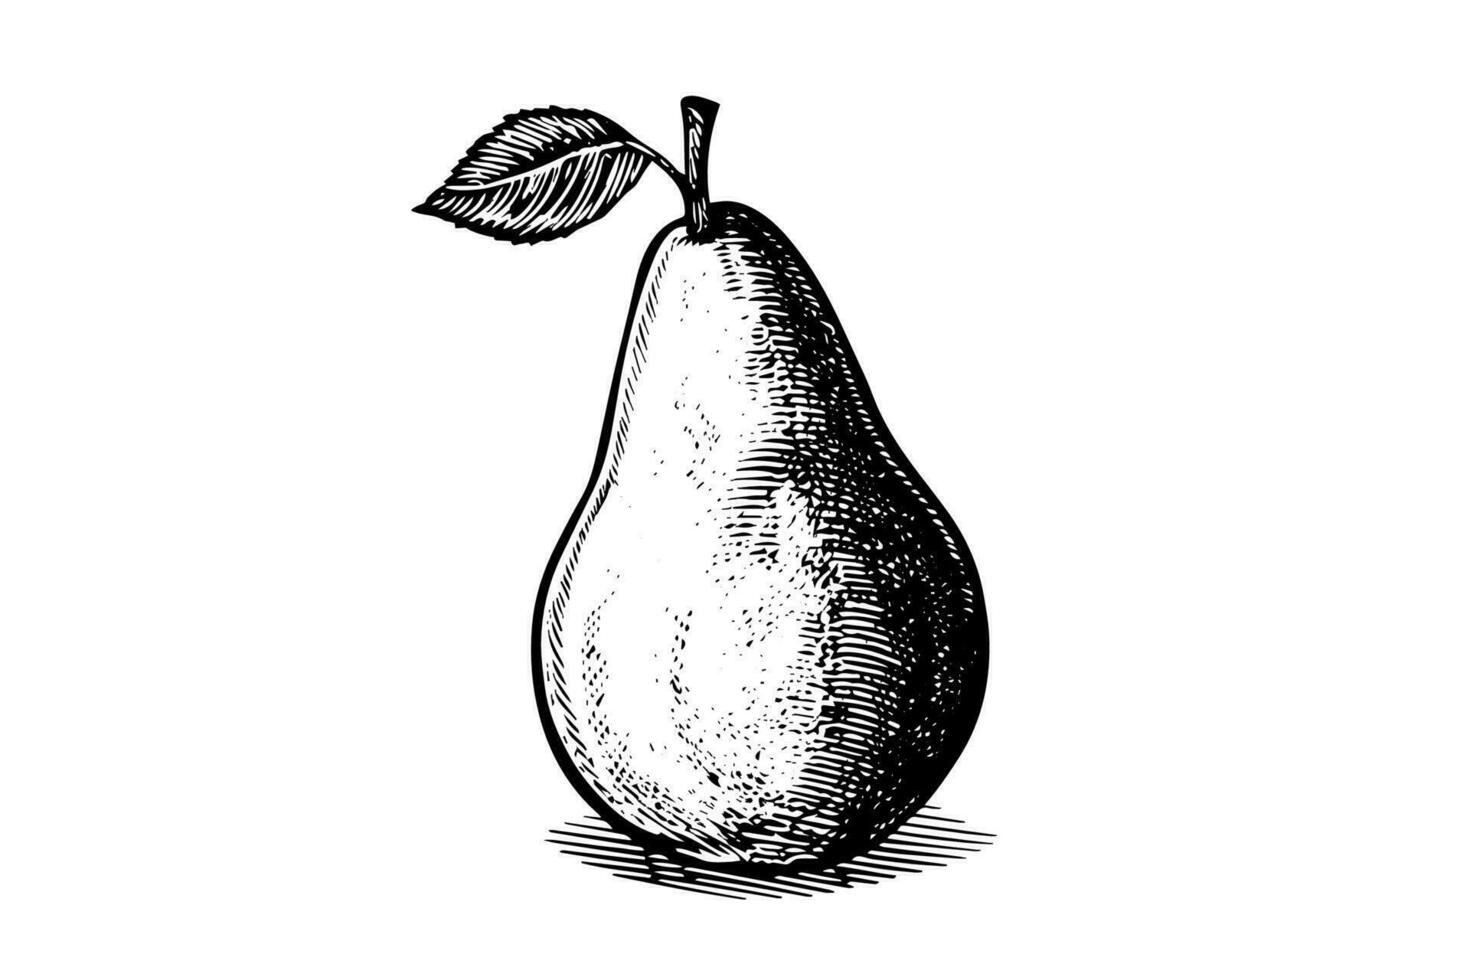 Pear. Ink sketch isolated on white background. Hand drawn vector illustration.